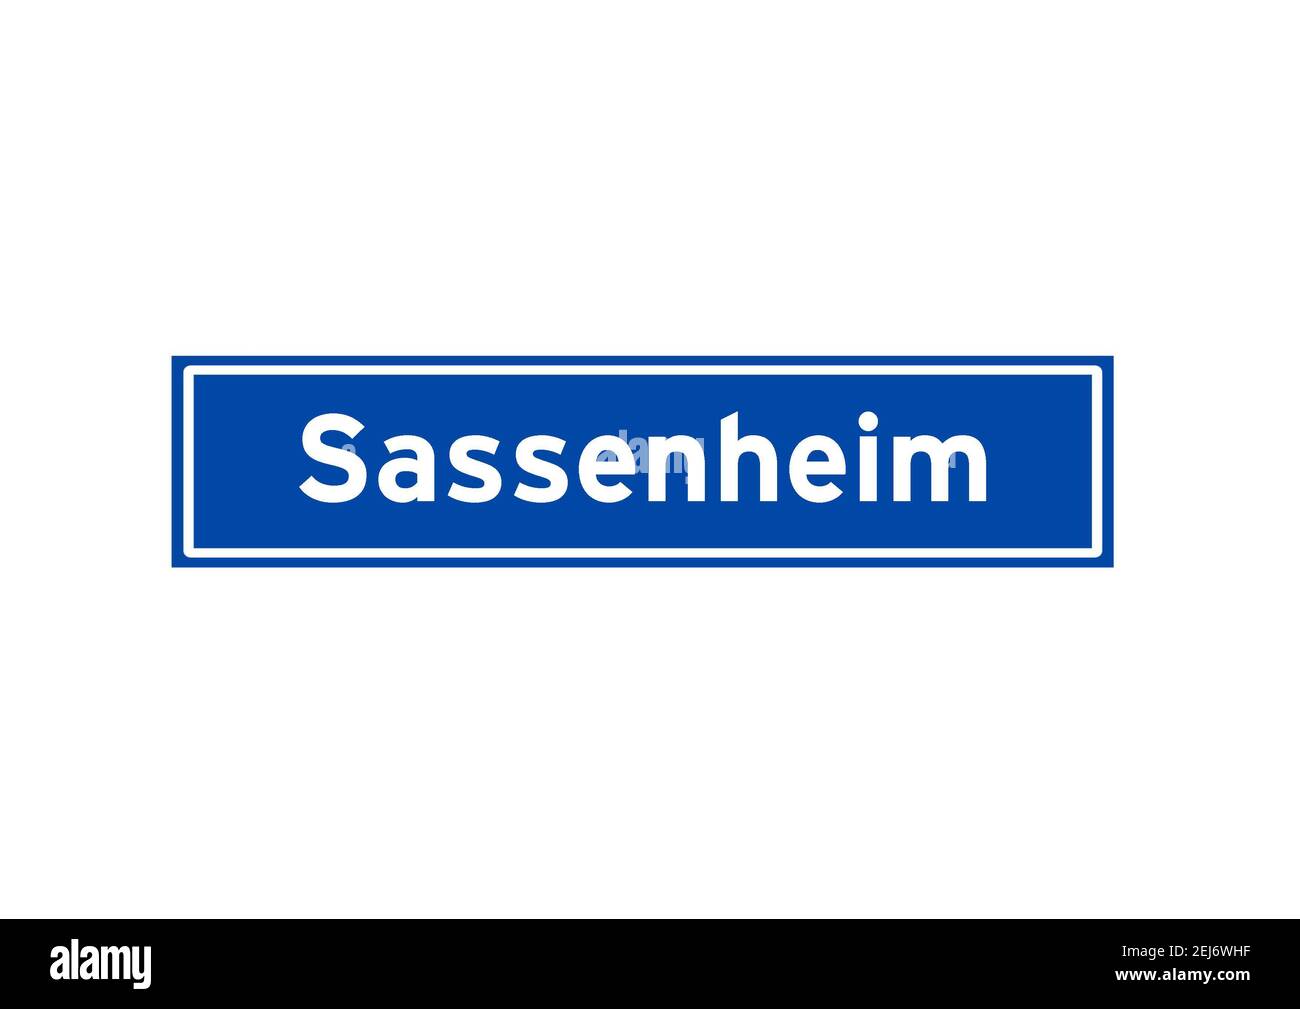 Sassenheim isolated Dutch place name sign. City sign from the Netherlands. Stock Photo